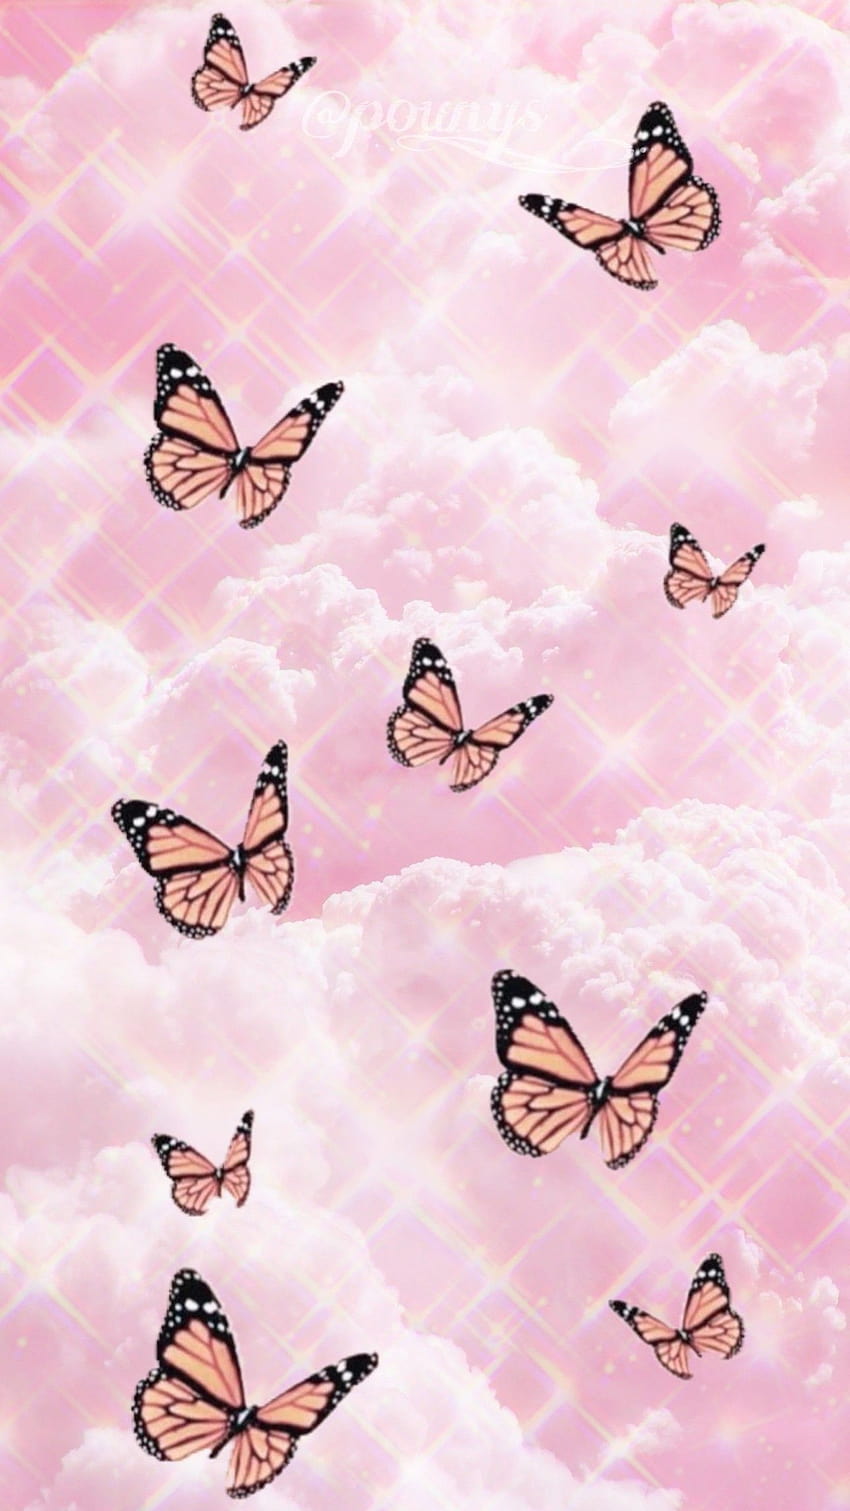 ✨ Butterfly Pink ✨, pink butterfly aesthetic HD phone wallpaper